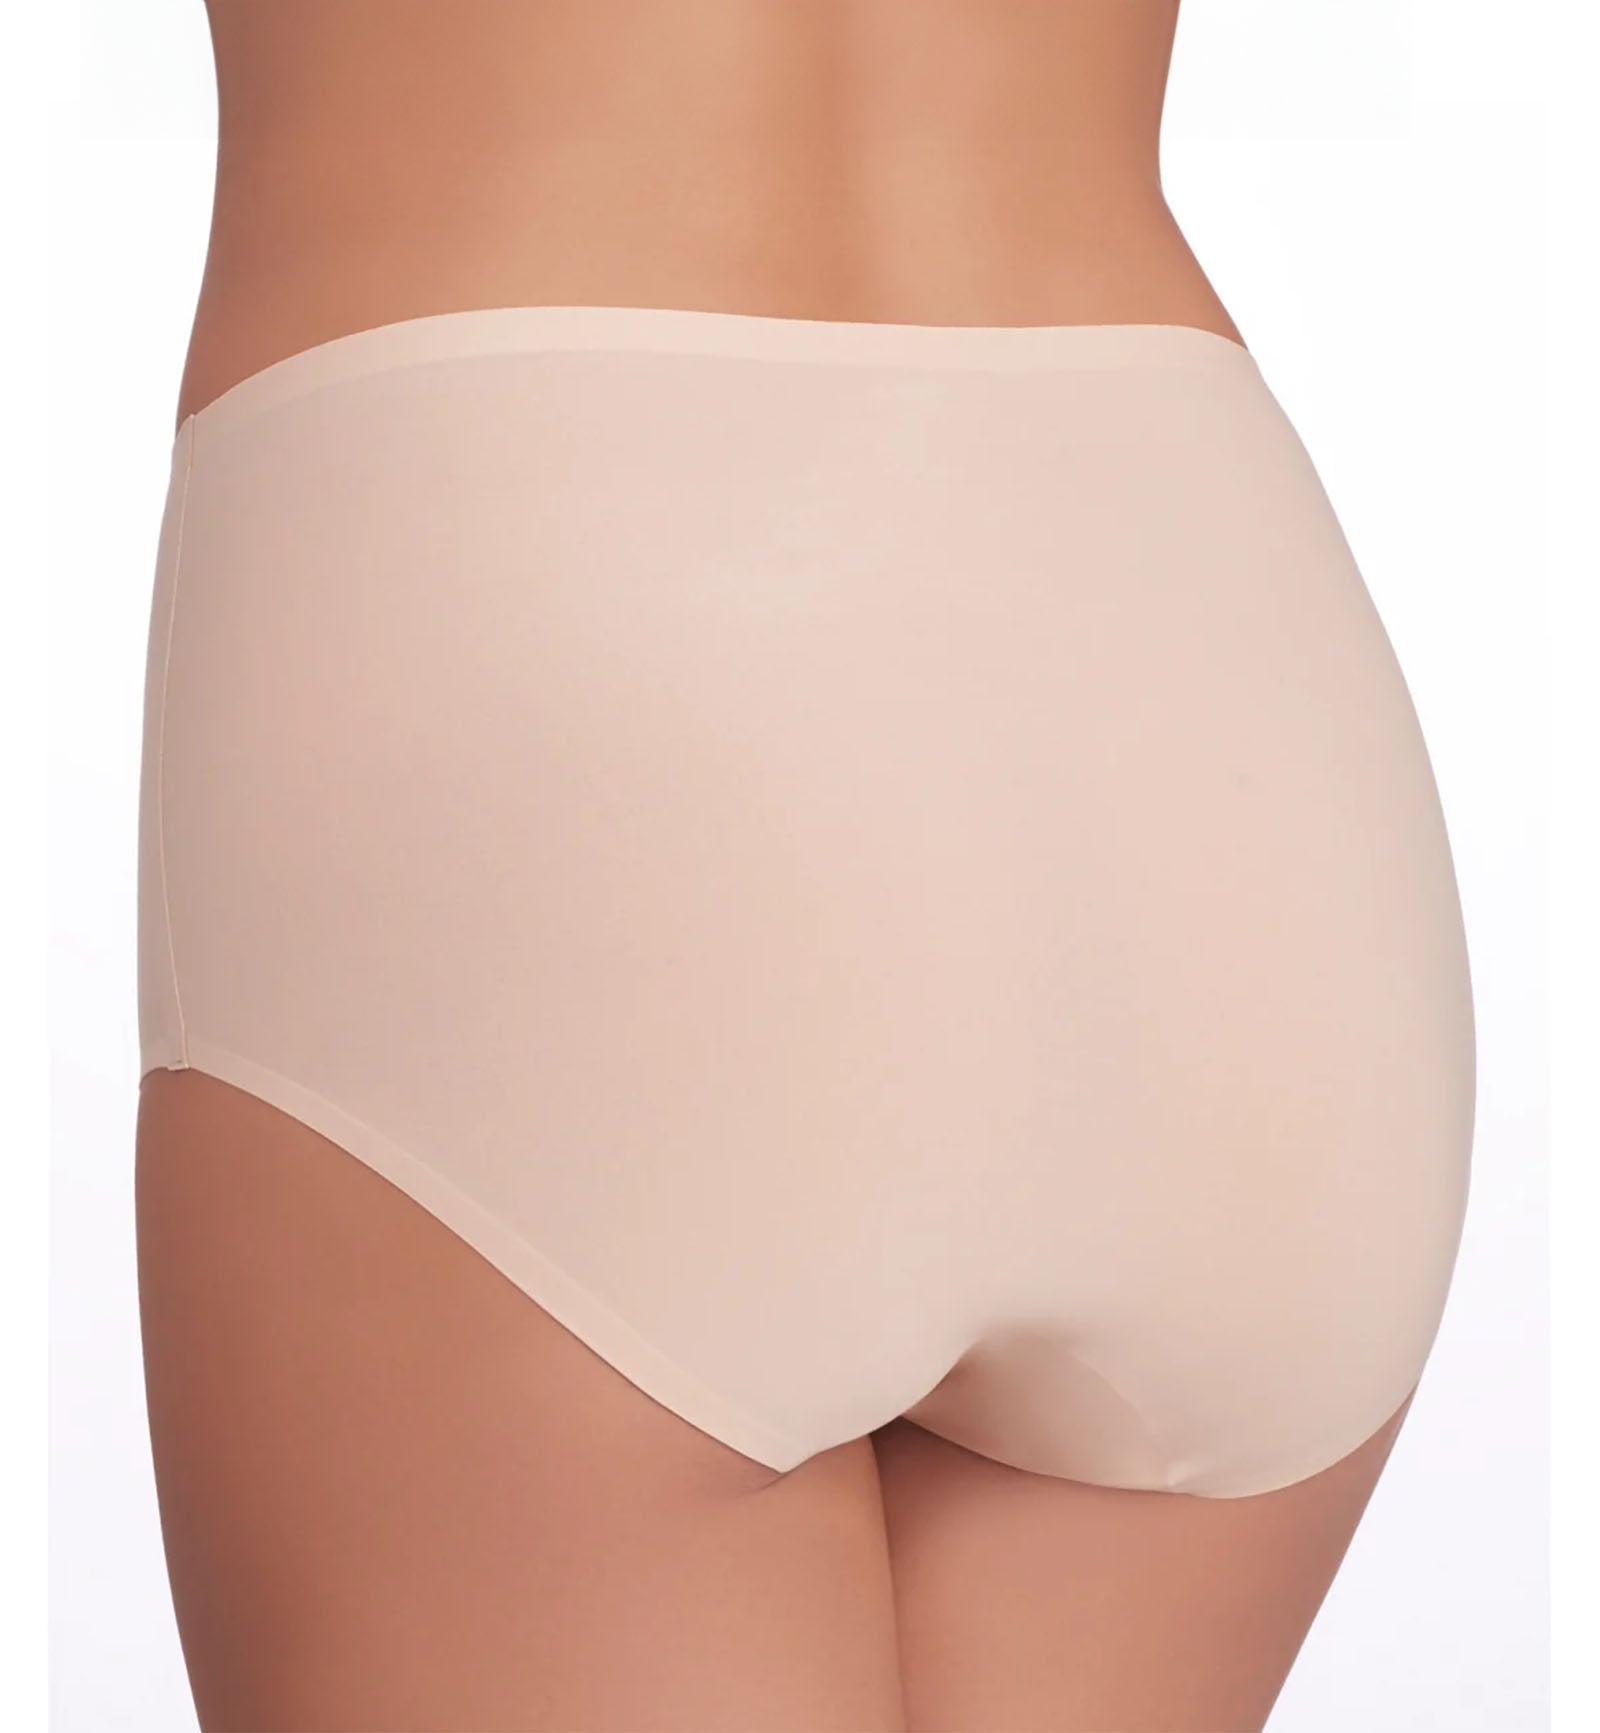 Chantelle 3-PACK Softstretch Full Brief (C10070),Ultra Nude - Ultra Nude,One Size